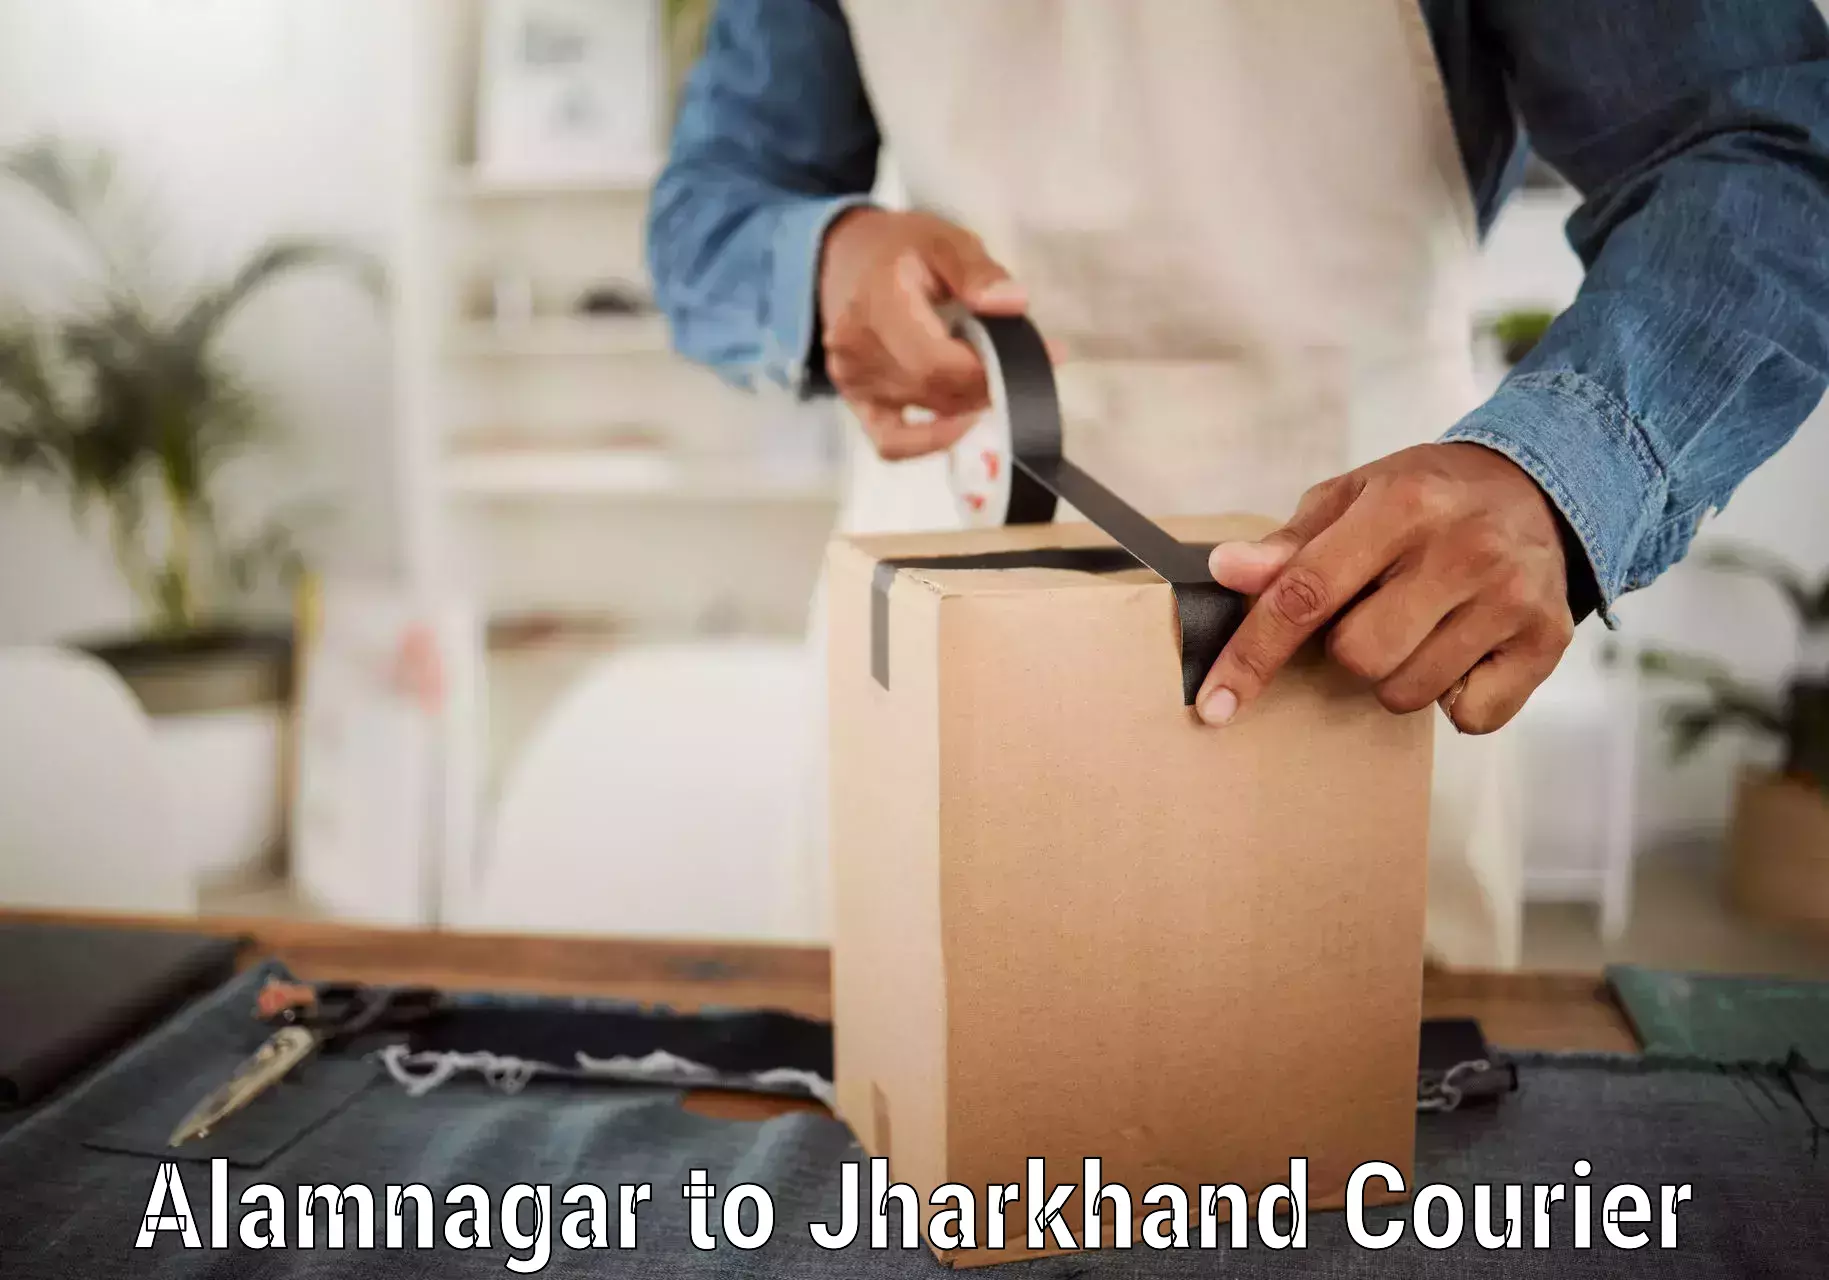 Speedy delivery service in Alamnagar to Jharkhand